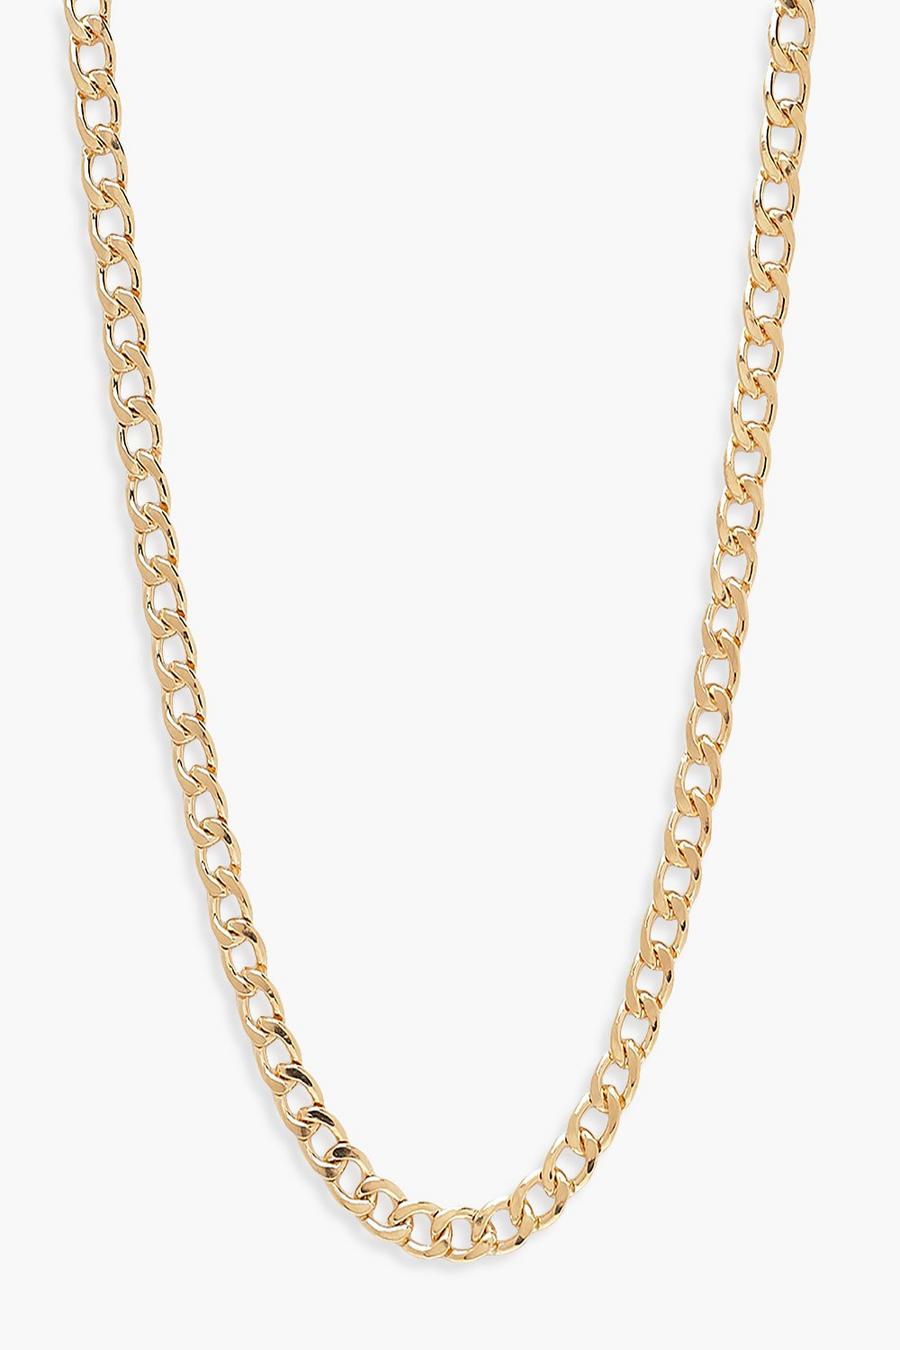 Gold metallic Simple Curb Chain Layering Necklace